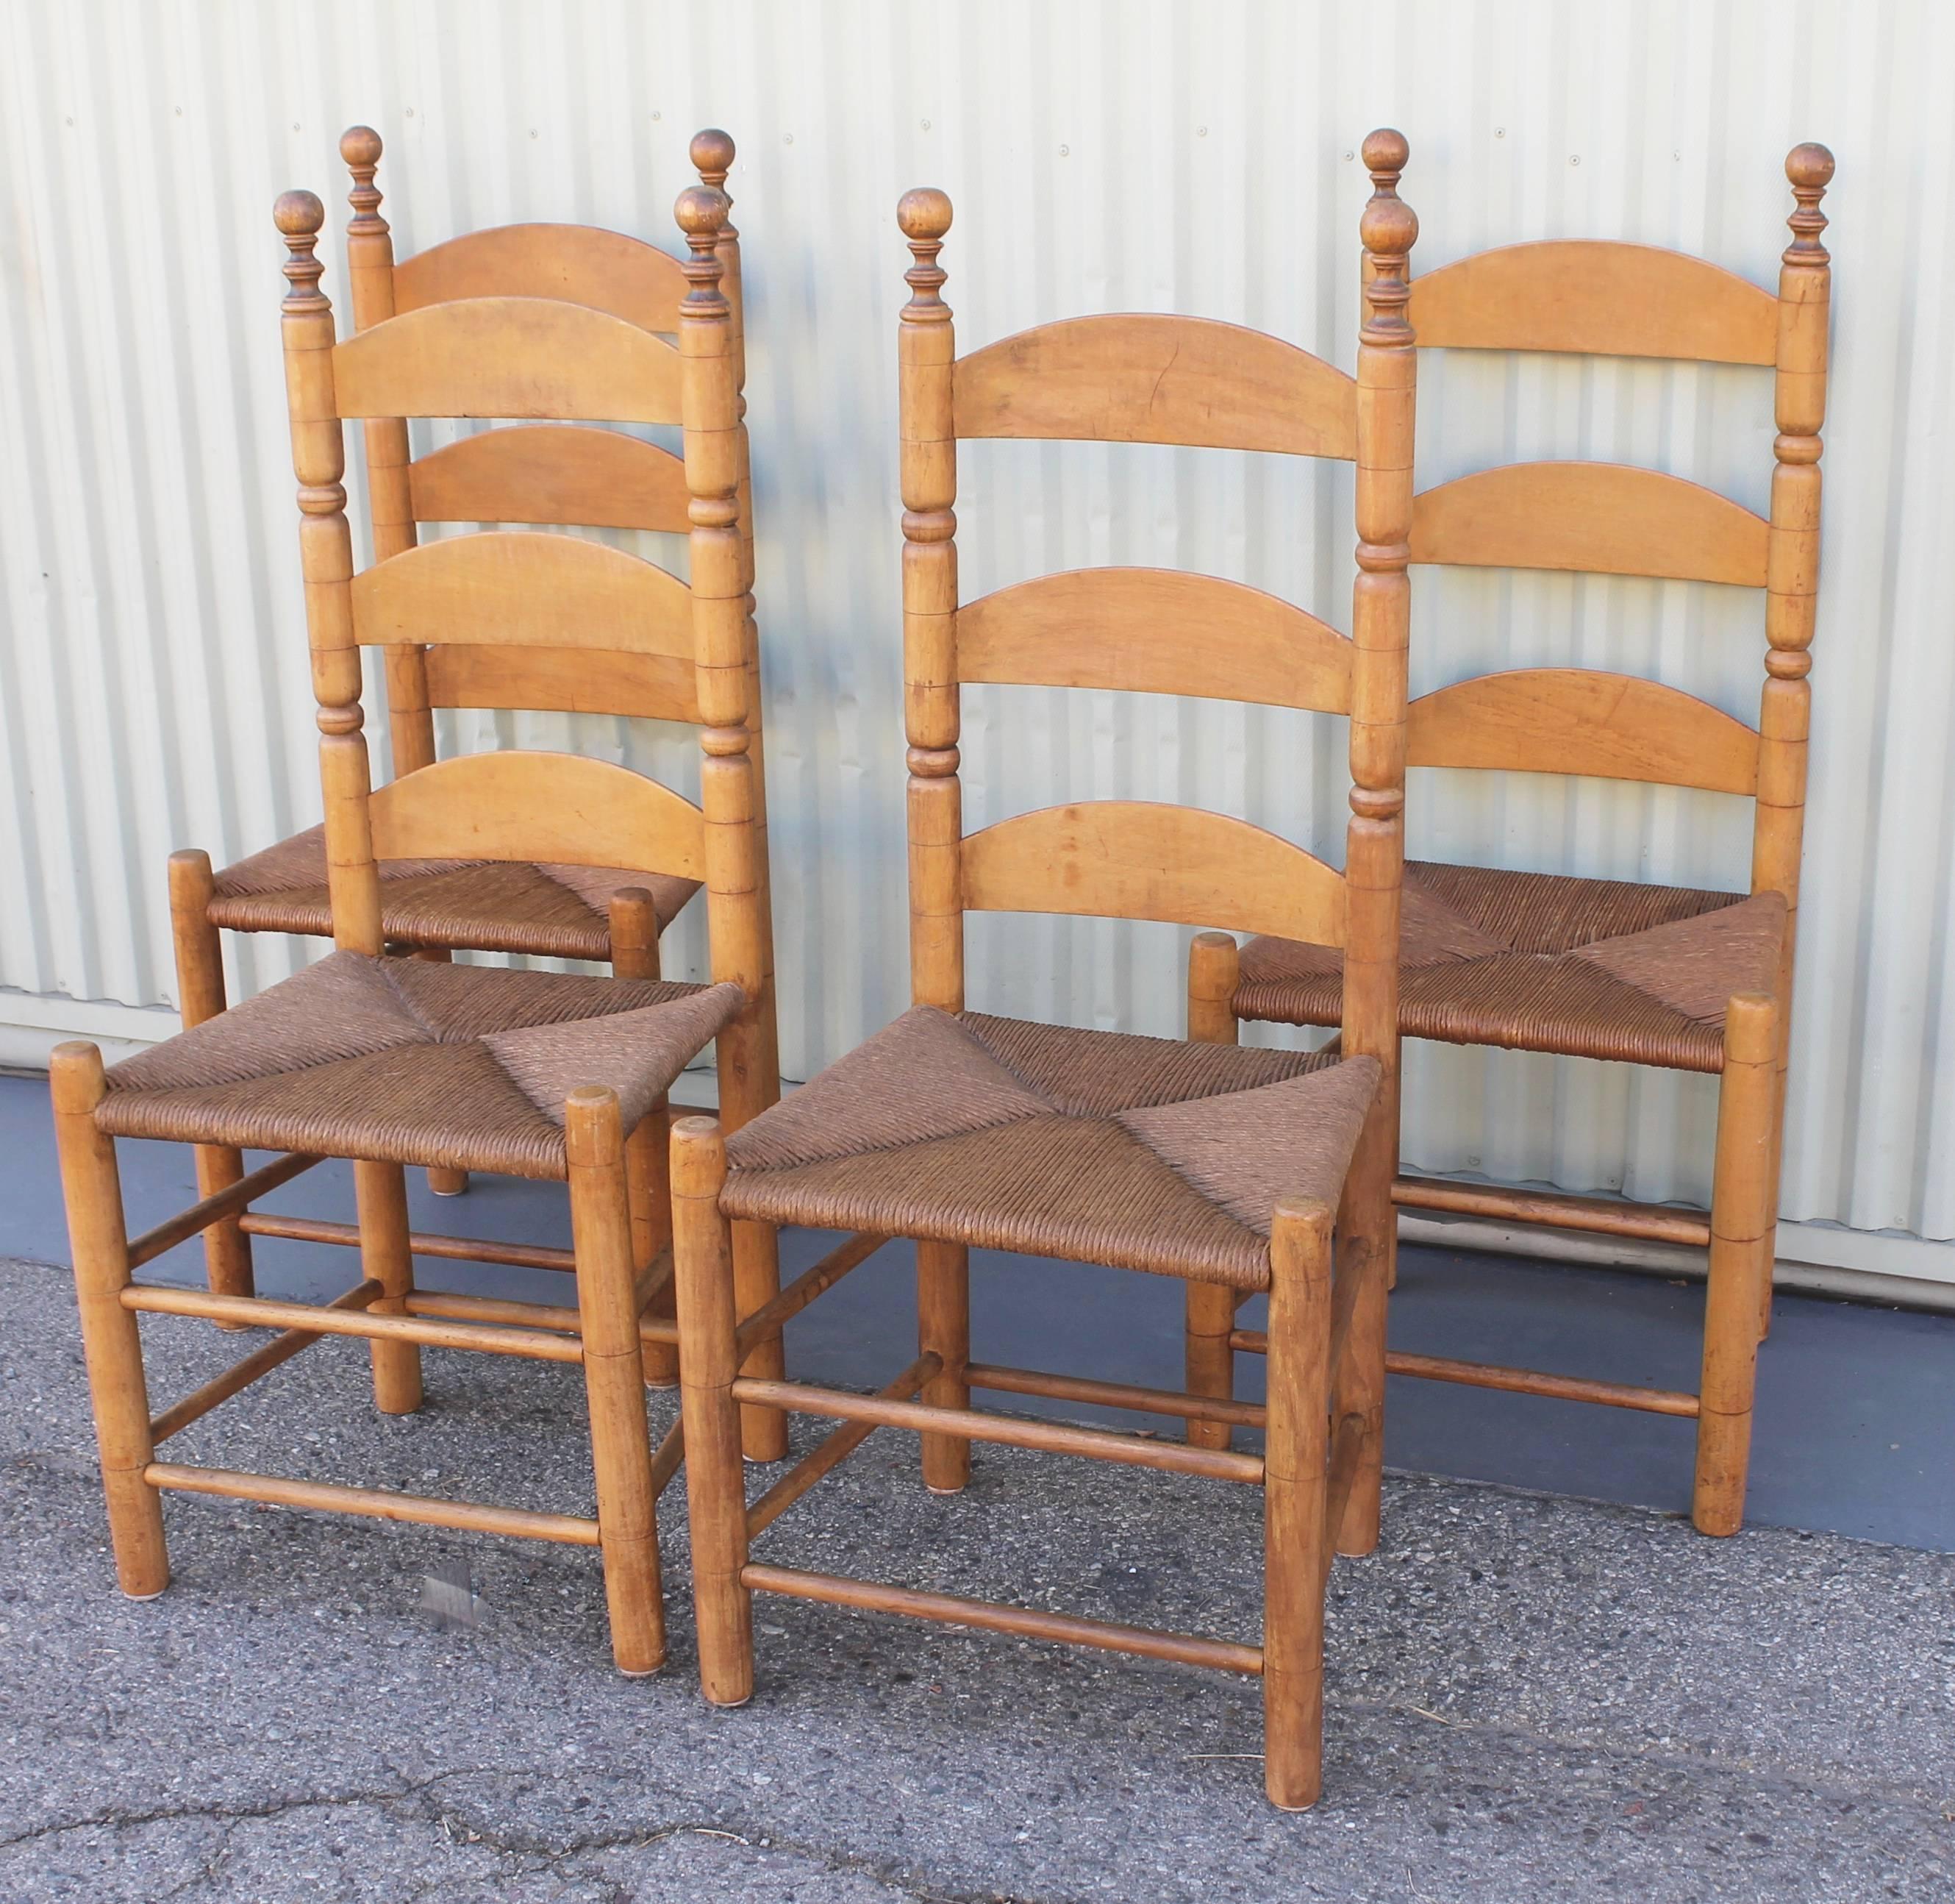 19th century original old surface ladder back chairs with hand woven rush seats. These new England chairs are in fine as found condition and have a great aged patina.